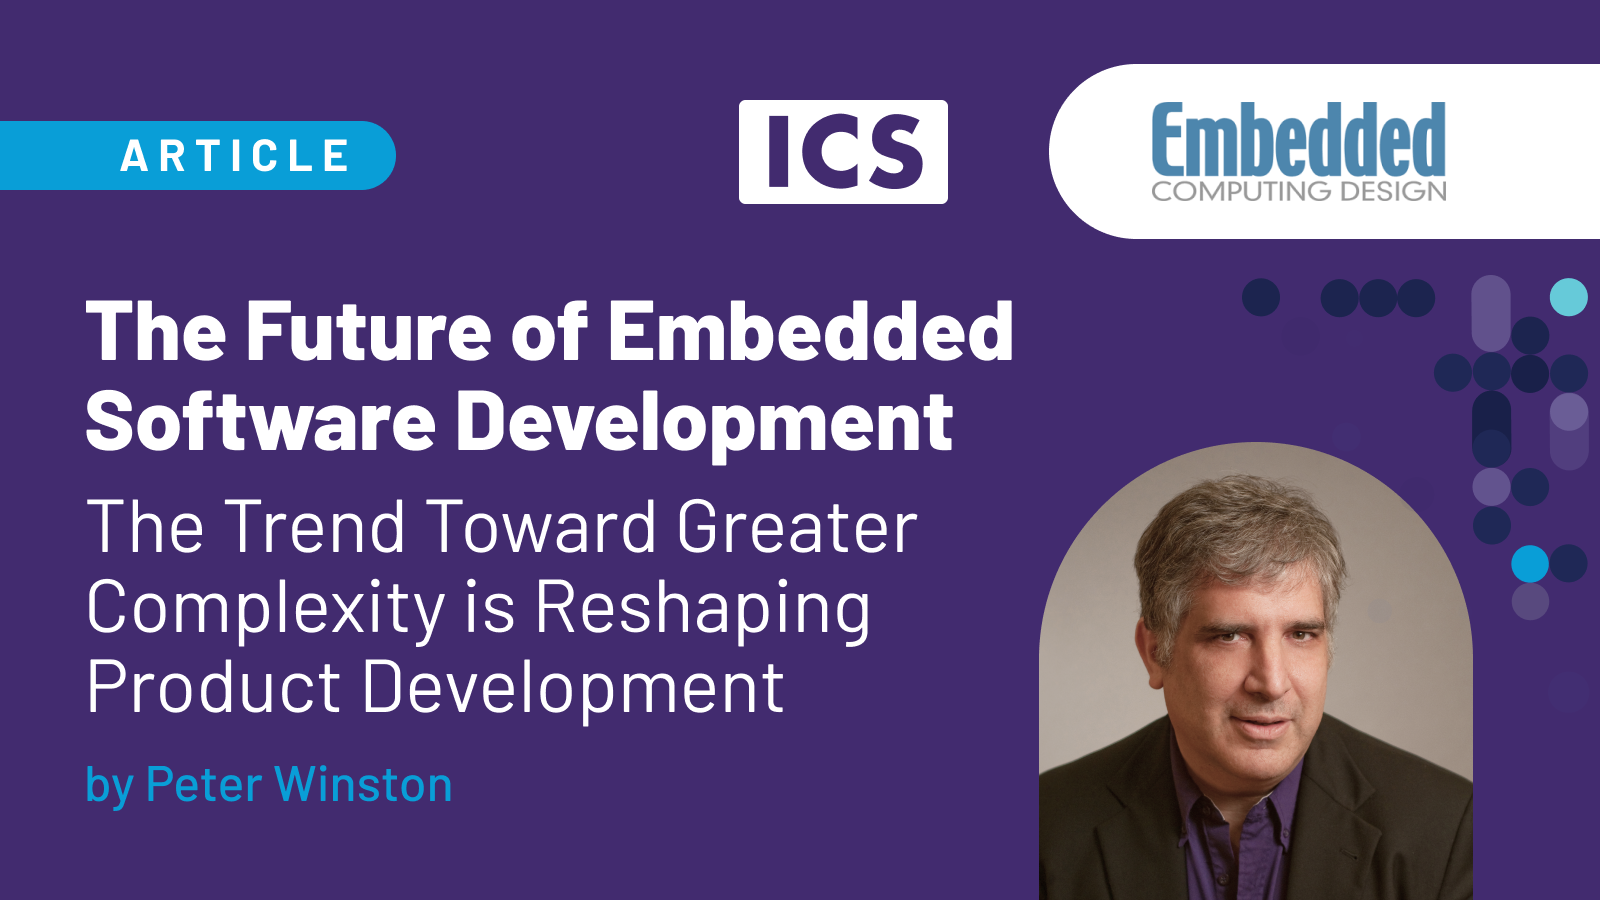 The Future of Embedded Software Development